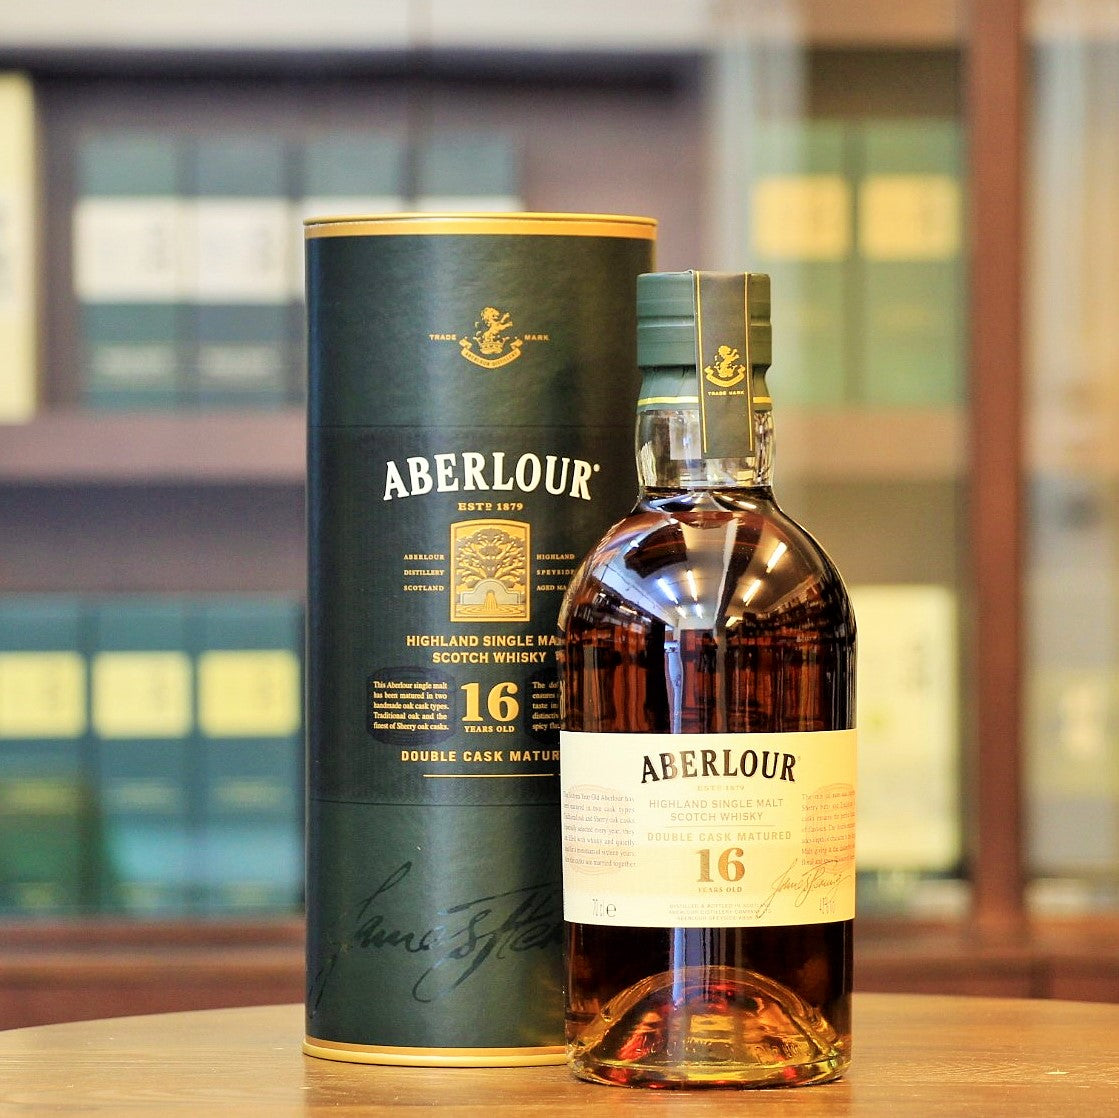 This speyside single malt from Aberlour distillery is matured in a combination of American Oak Casks and Sherry Butts for 16 years. Deep and complex, Sweet, fruity and warm spice.